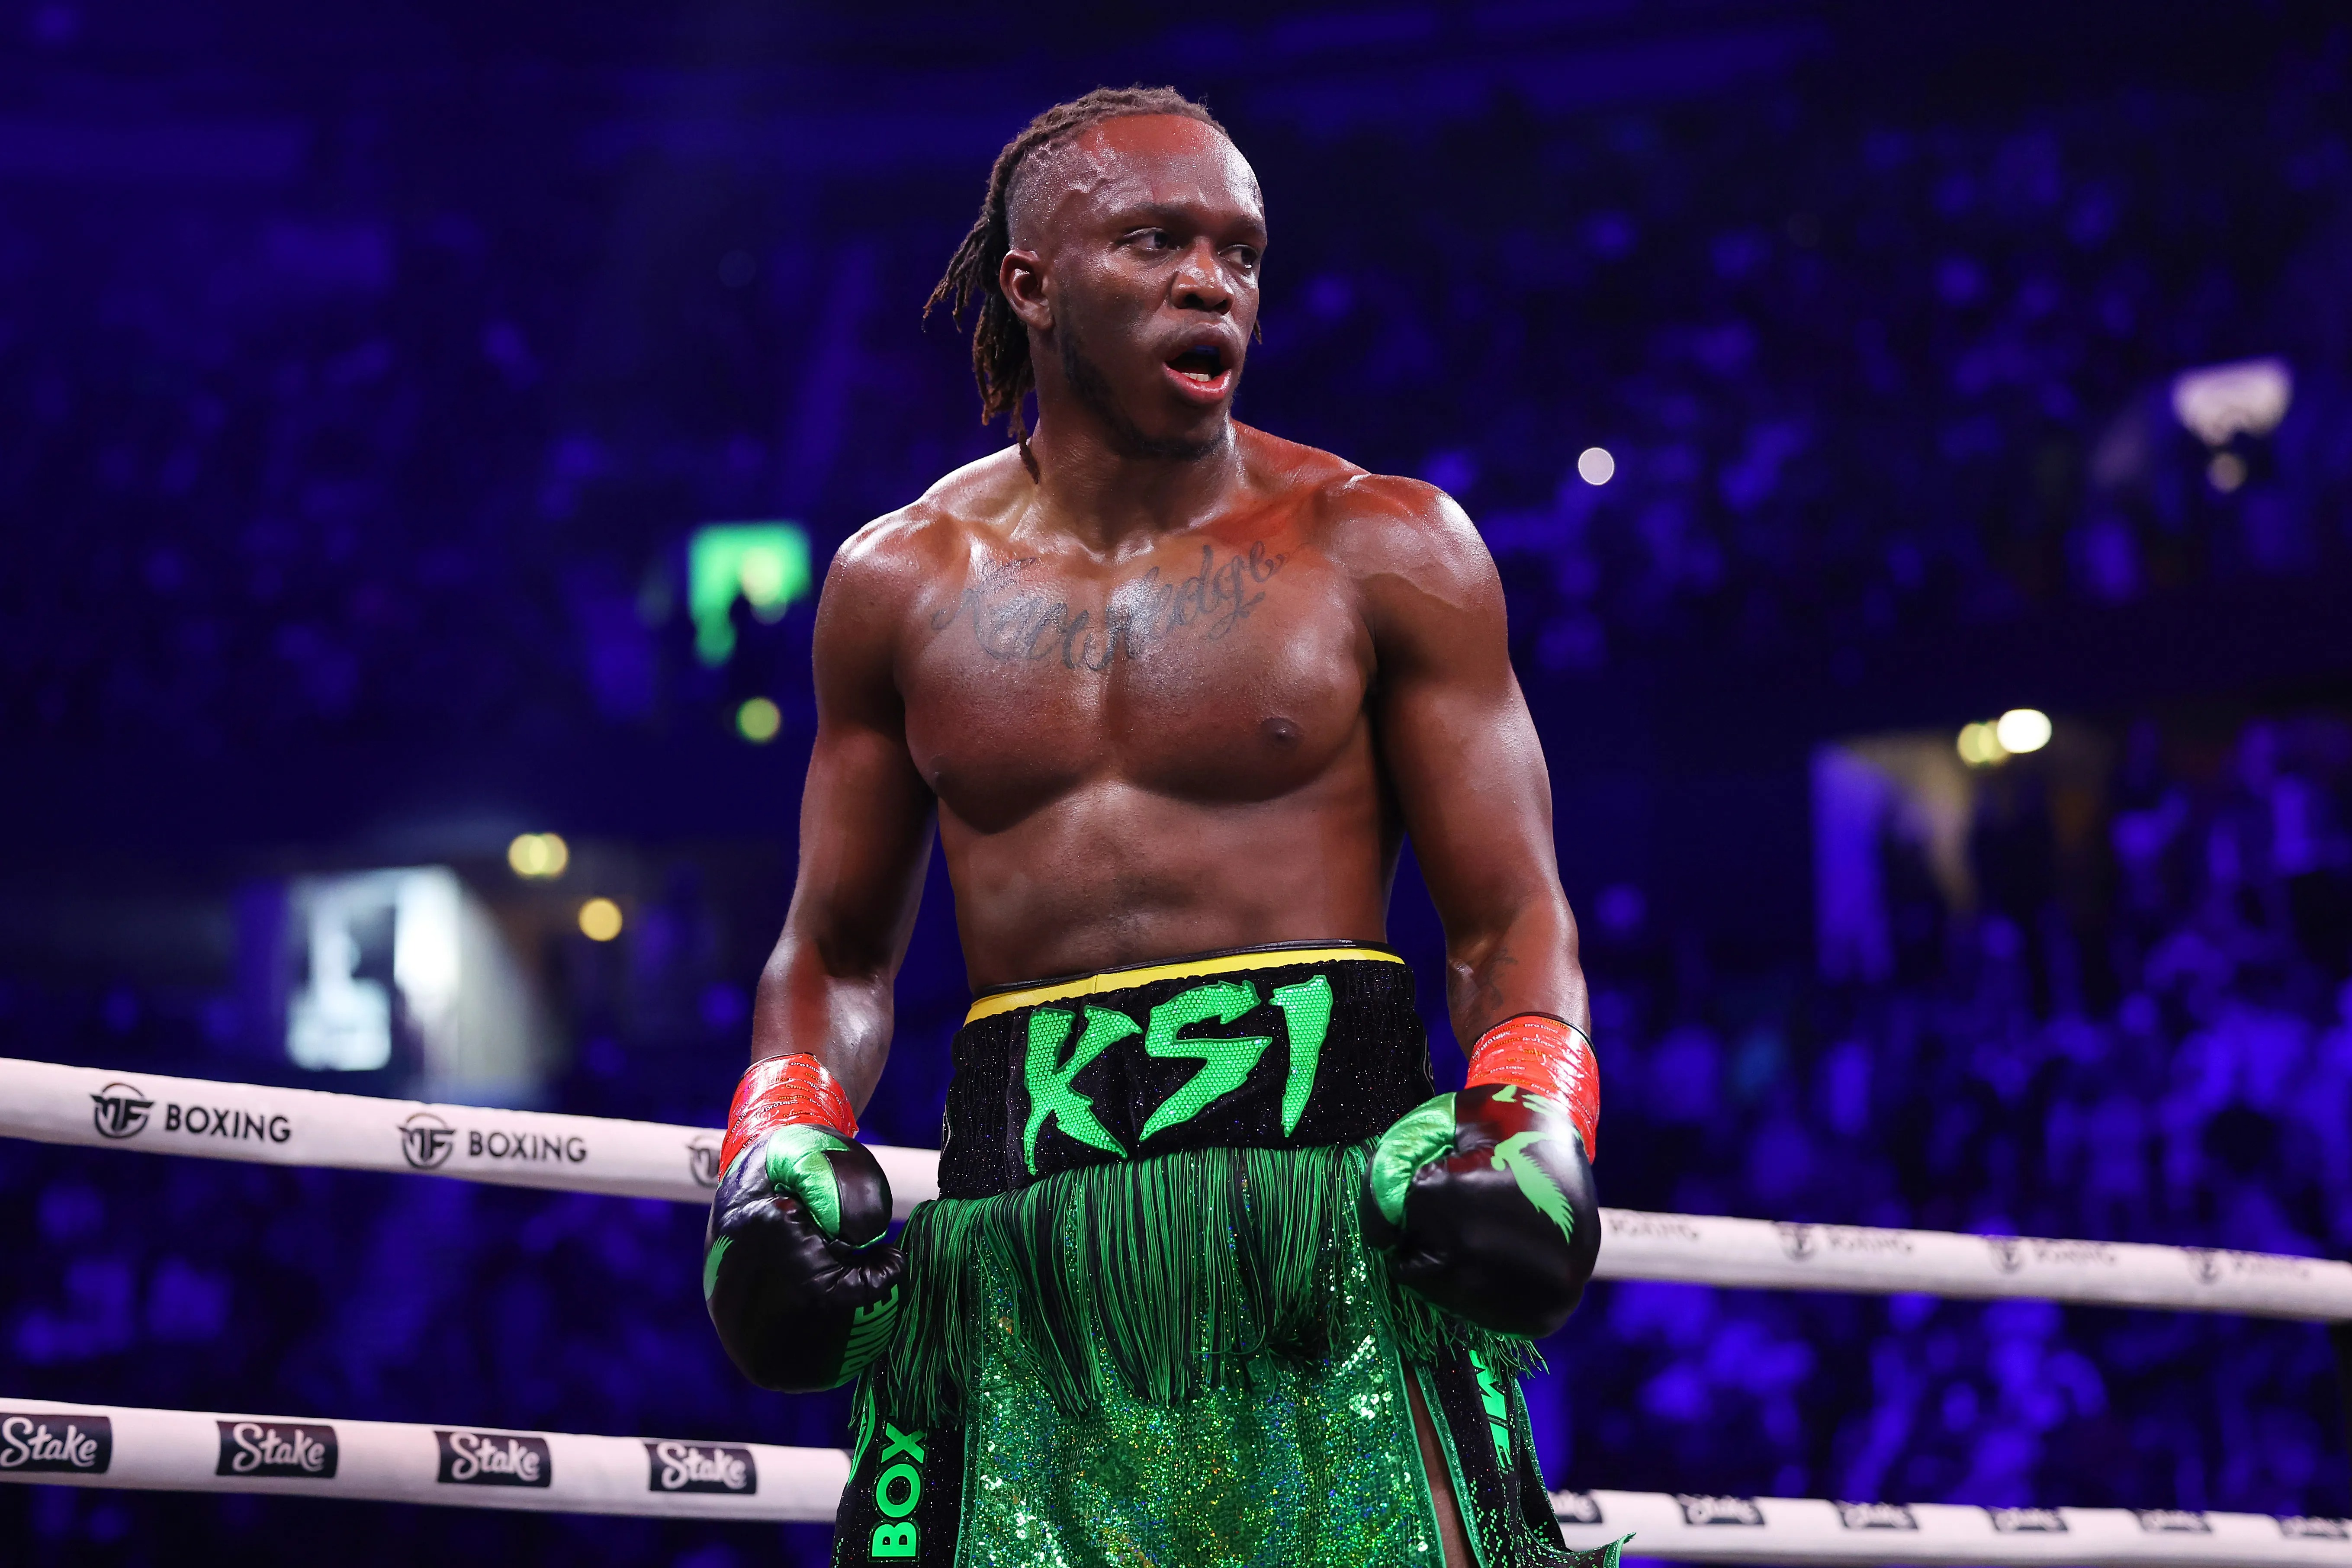 KSI could be a future fight for Khan